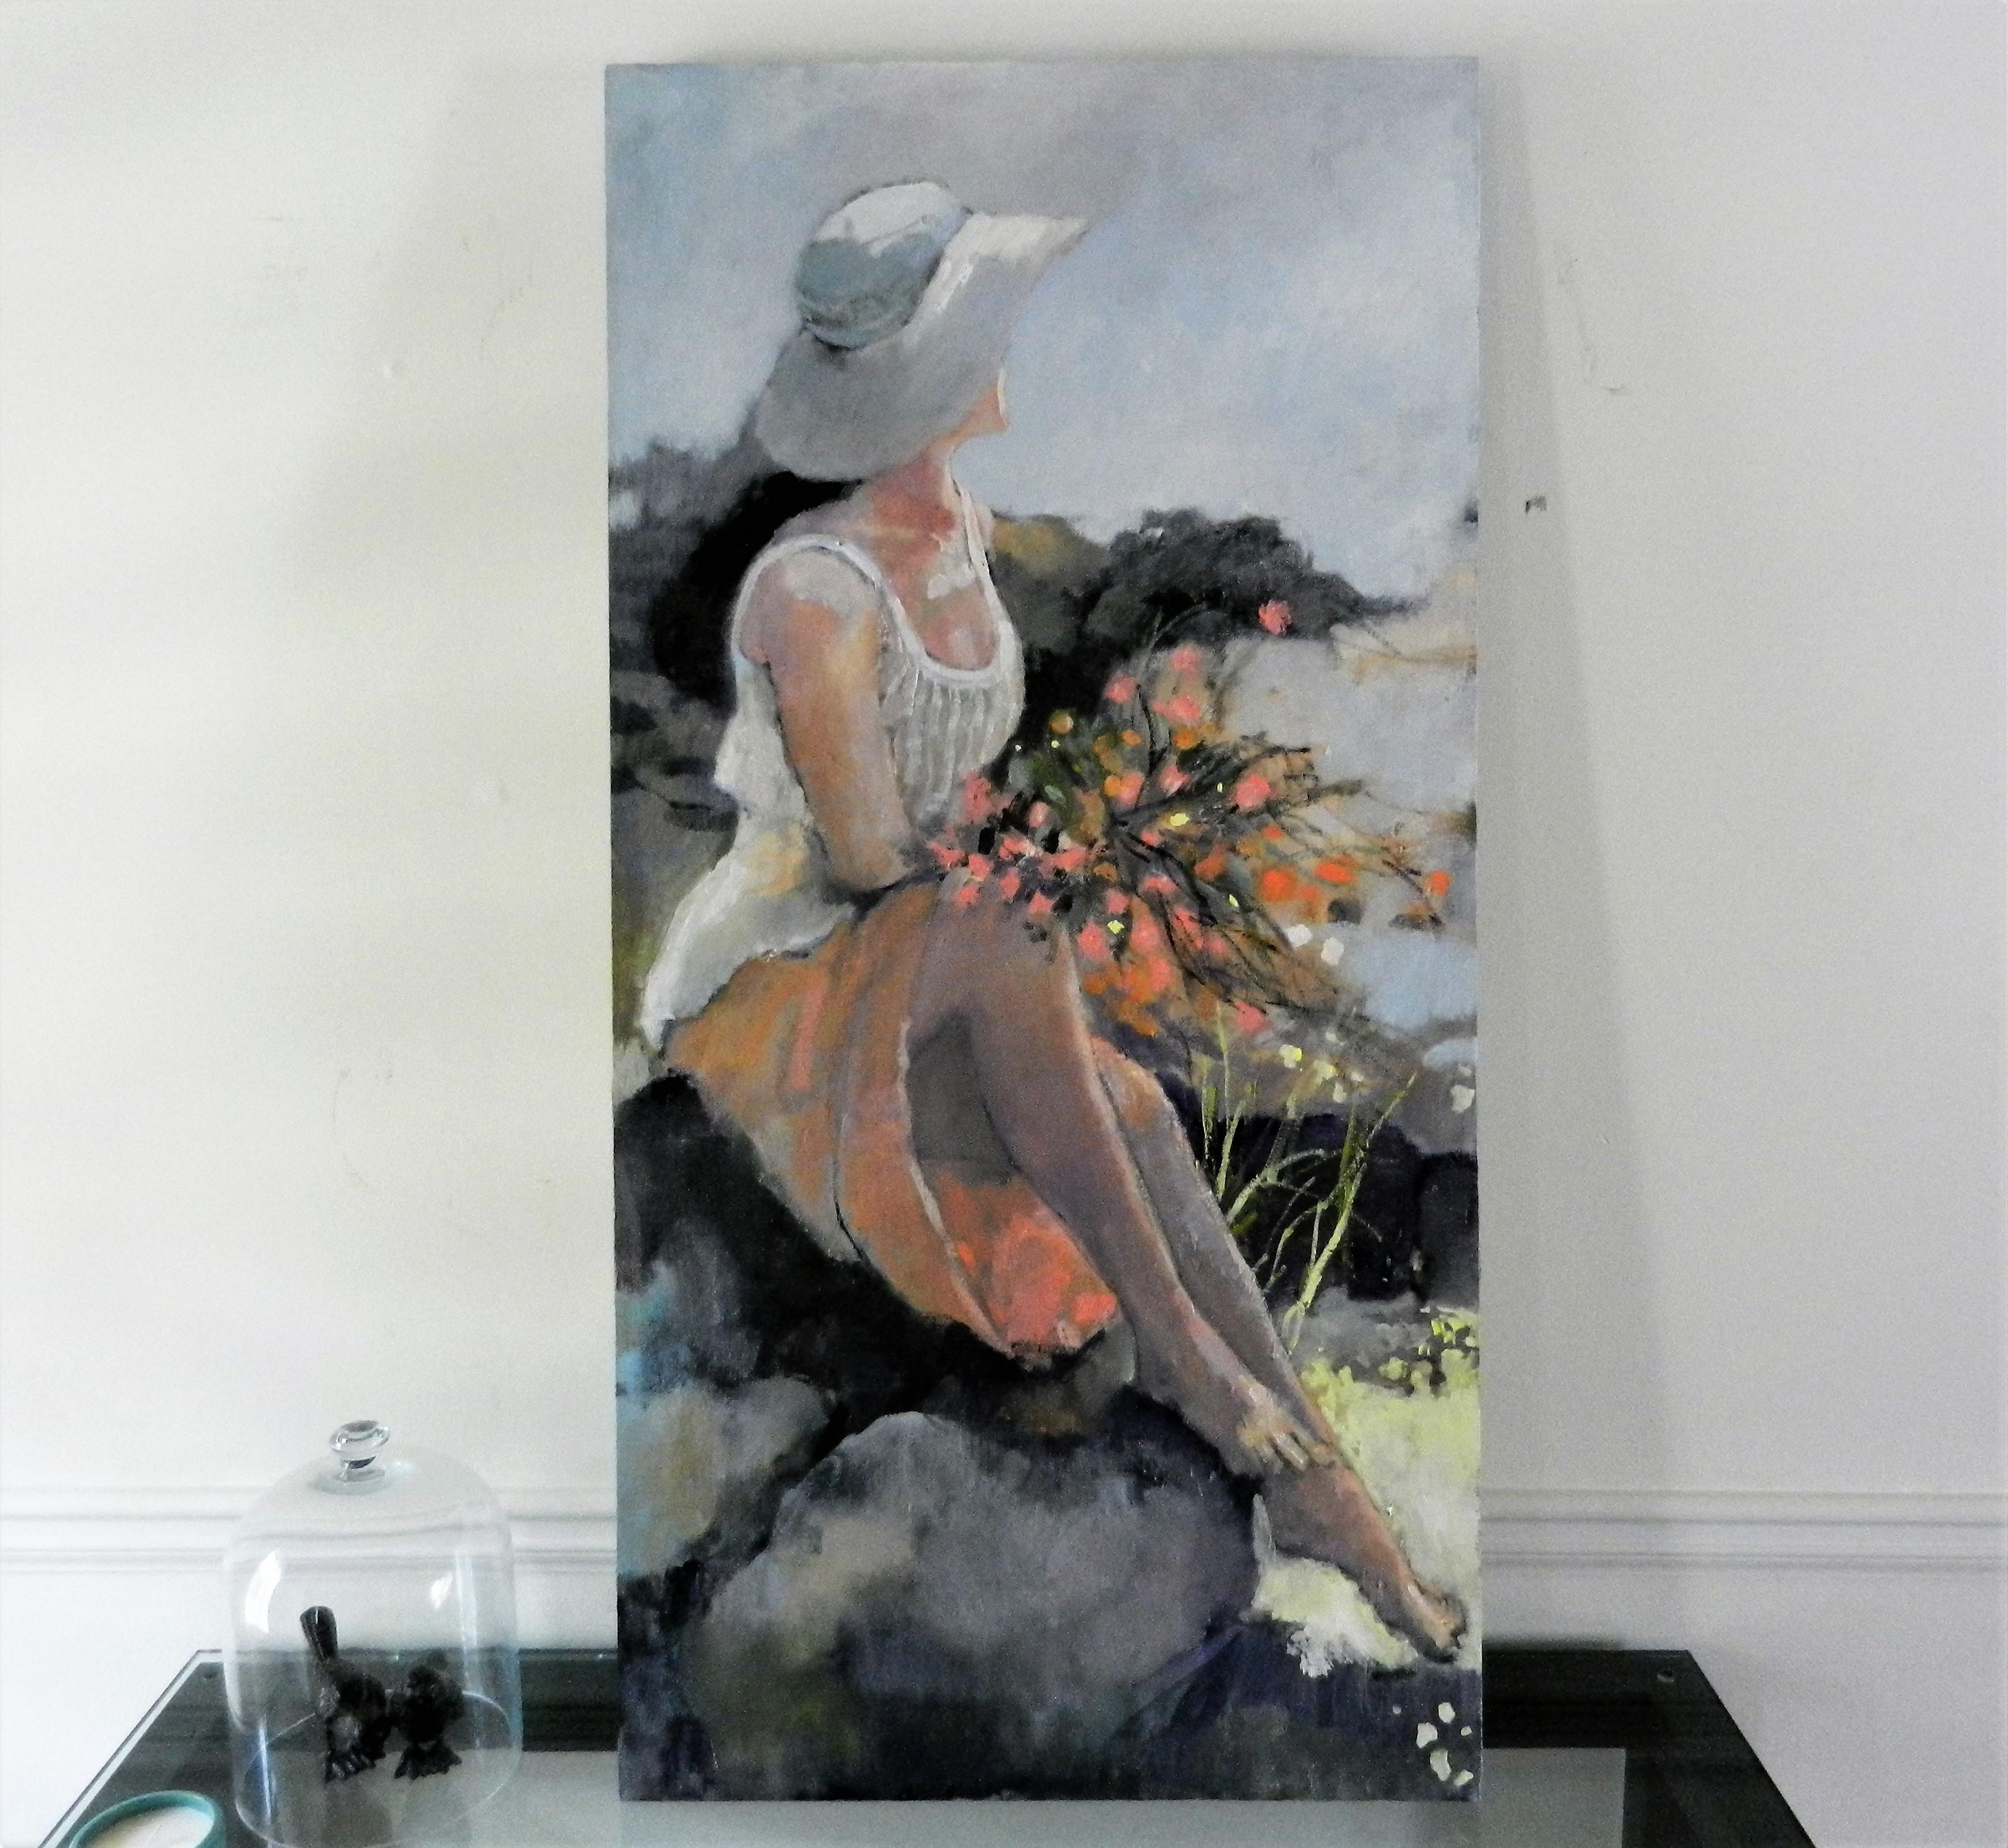 <p>Artist Comments<br>Working from a model, I created a romantic scene of a woman gazing off in the distance. You may wonder who she is waiting for or thinking about.</p><p>About the Artist<br>Mary Pratt, a Georgia-based artist, is known for her